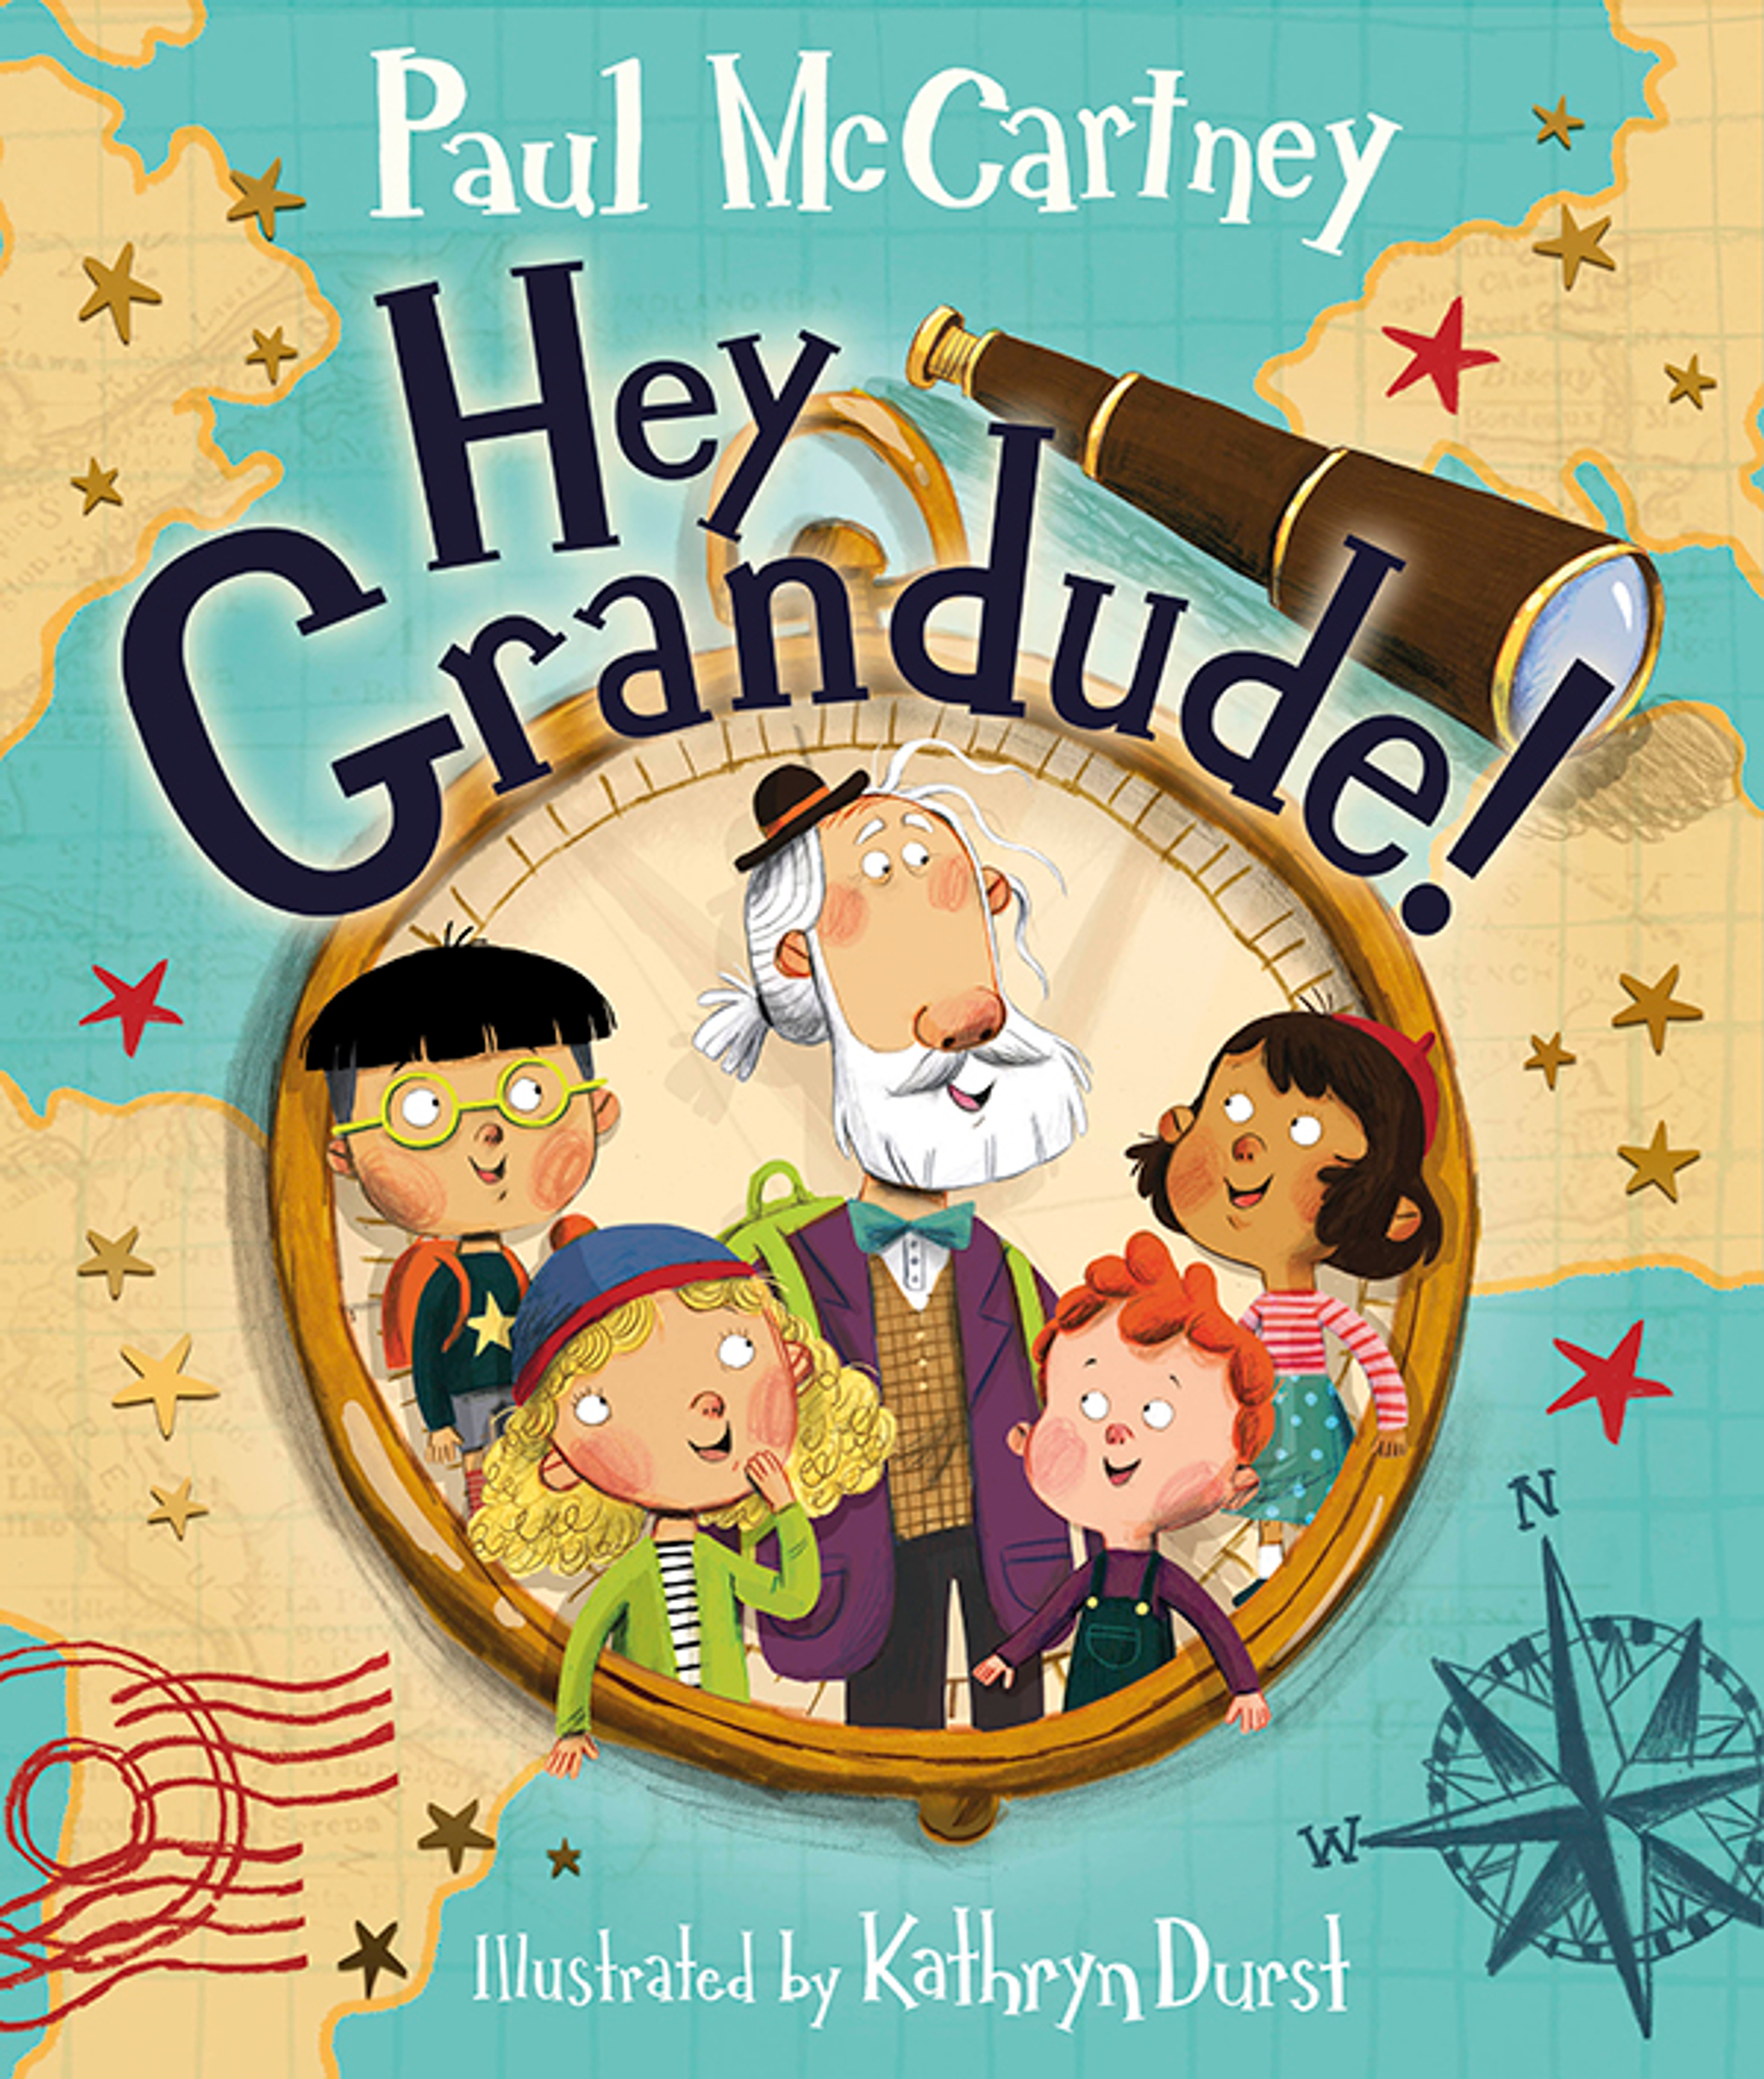 Paul shares the cover for his first ever picture book 'Hey Grandude!'